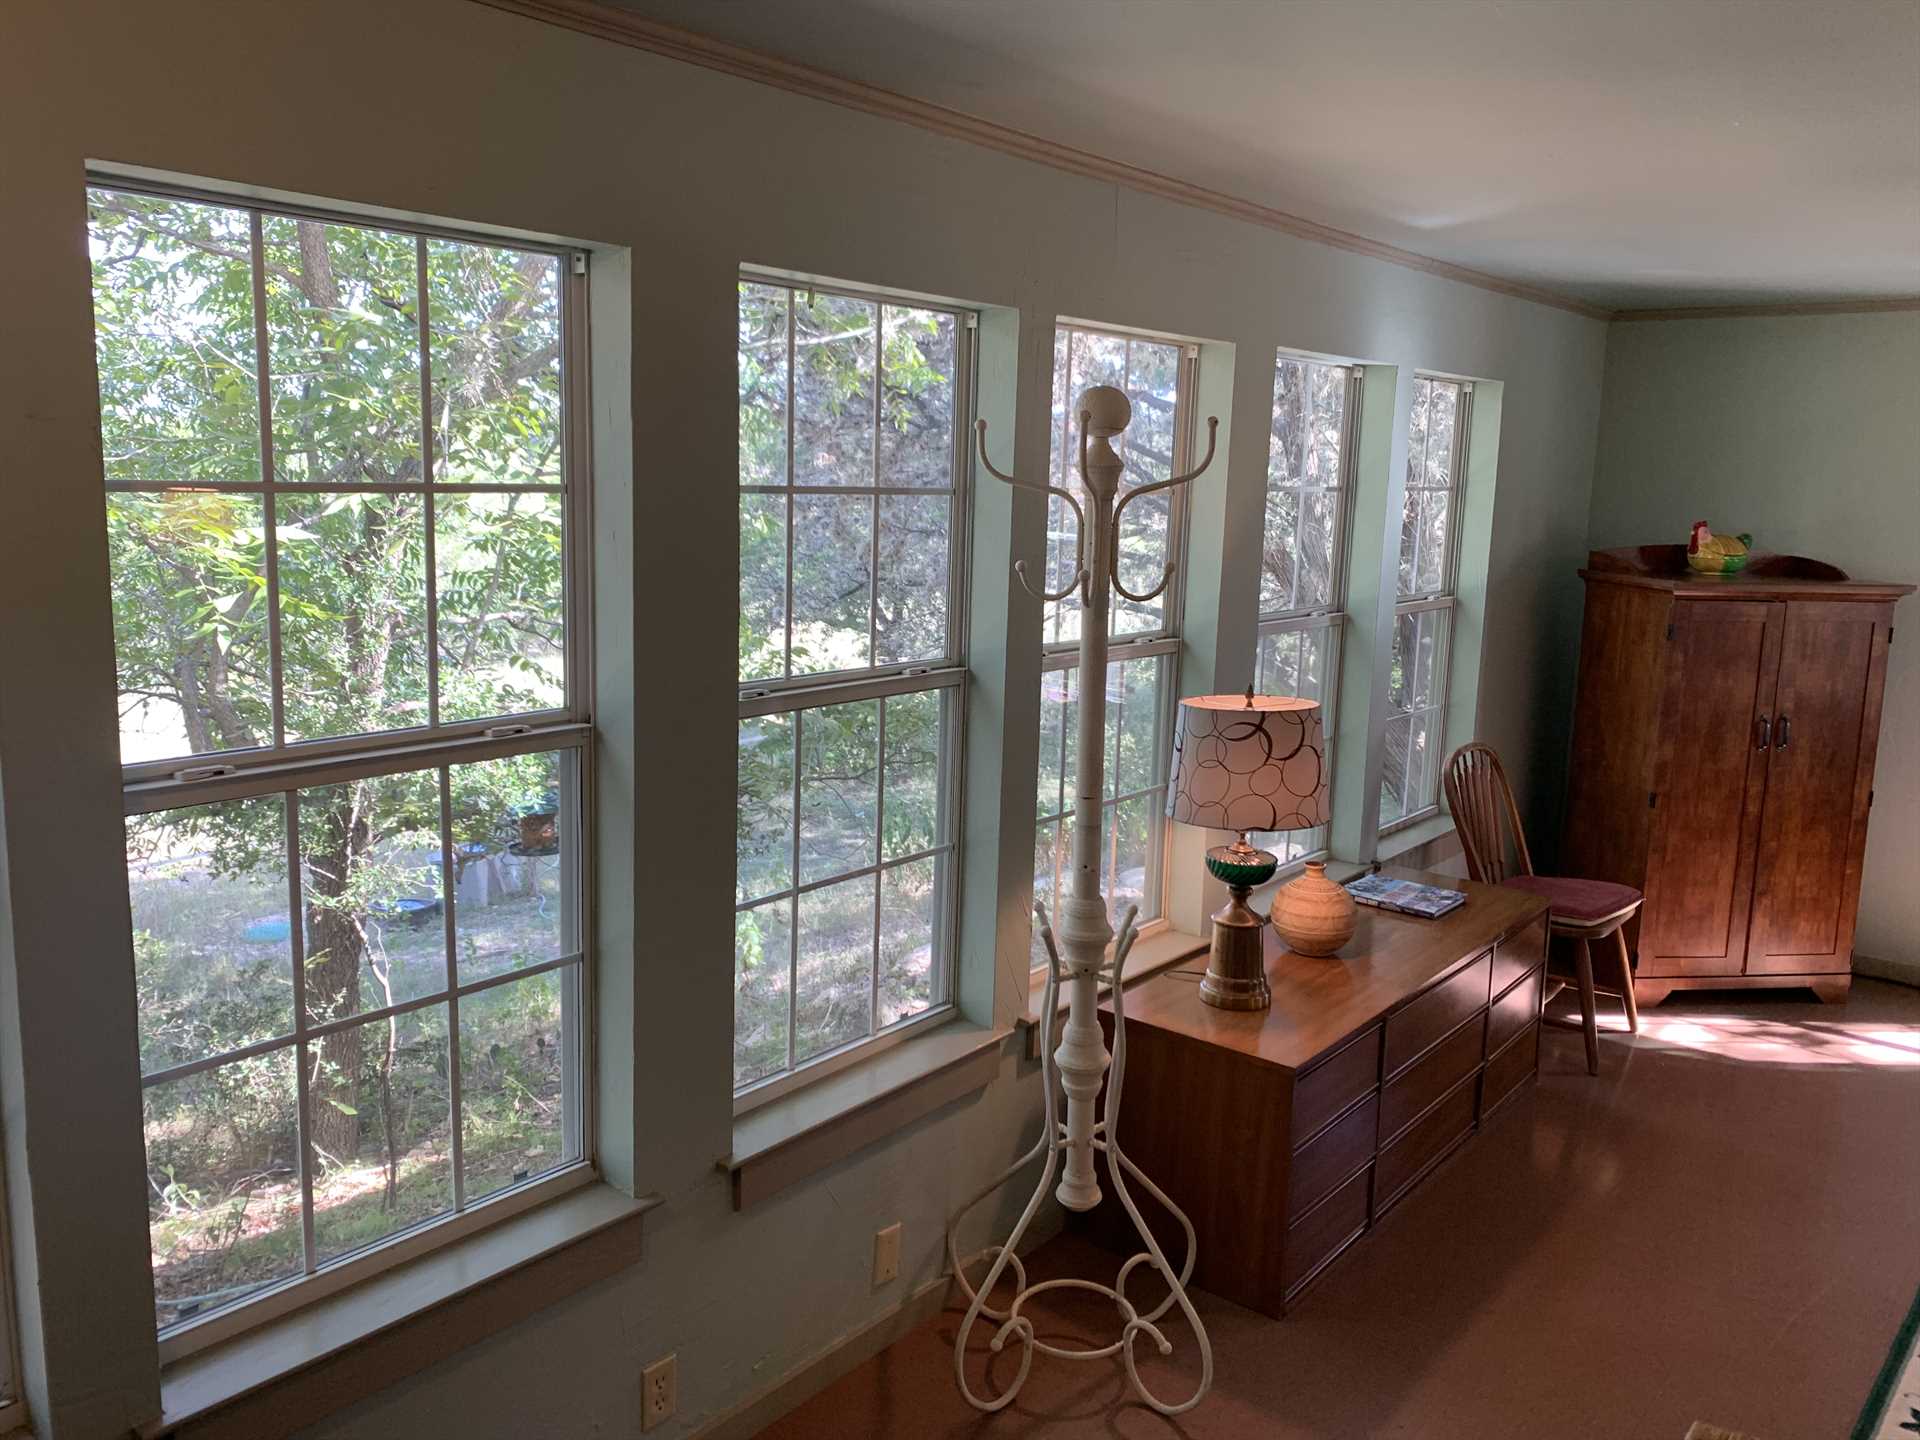                                                 Plenty of windows and mellow woodwork create a soothing and welcoming ambience.